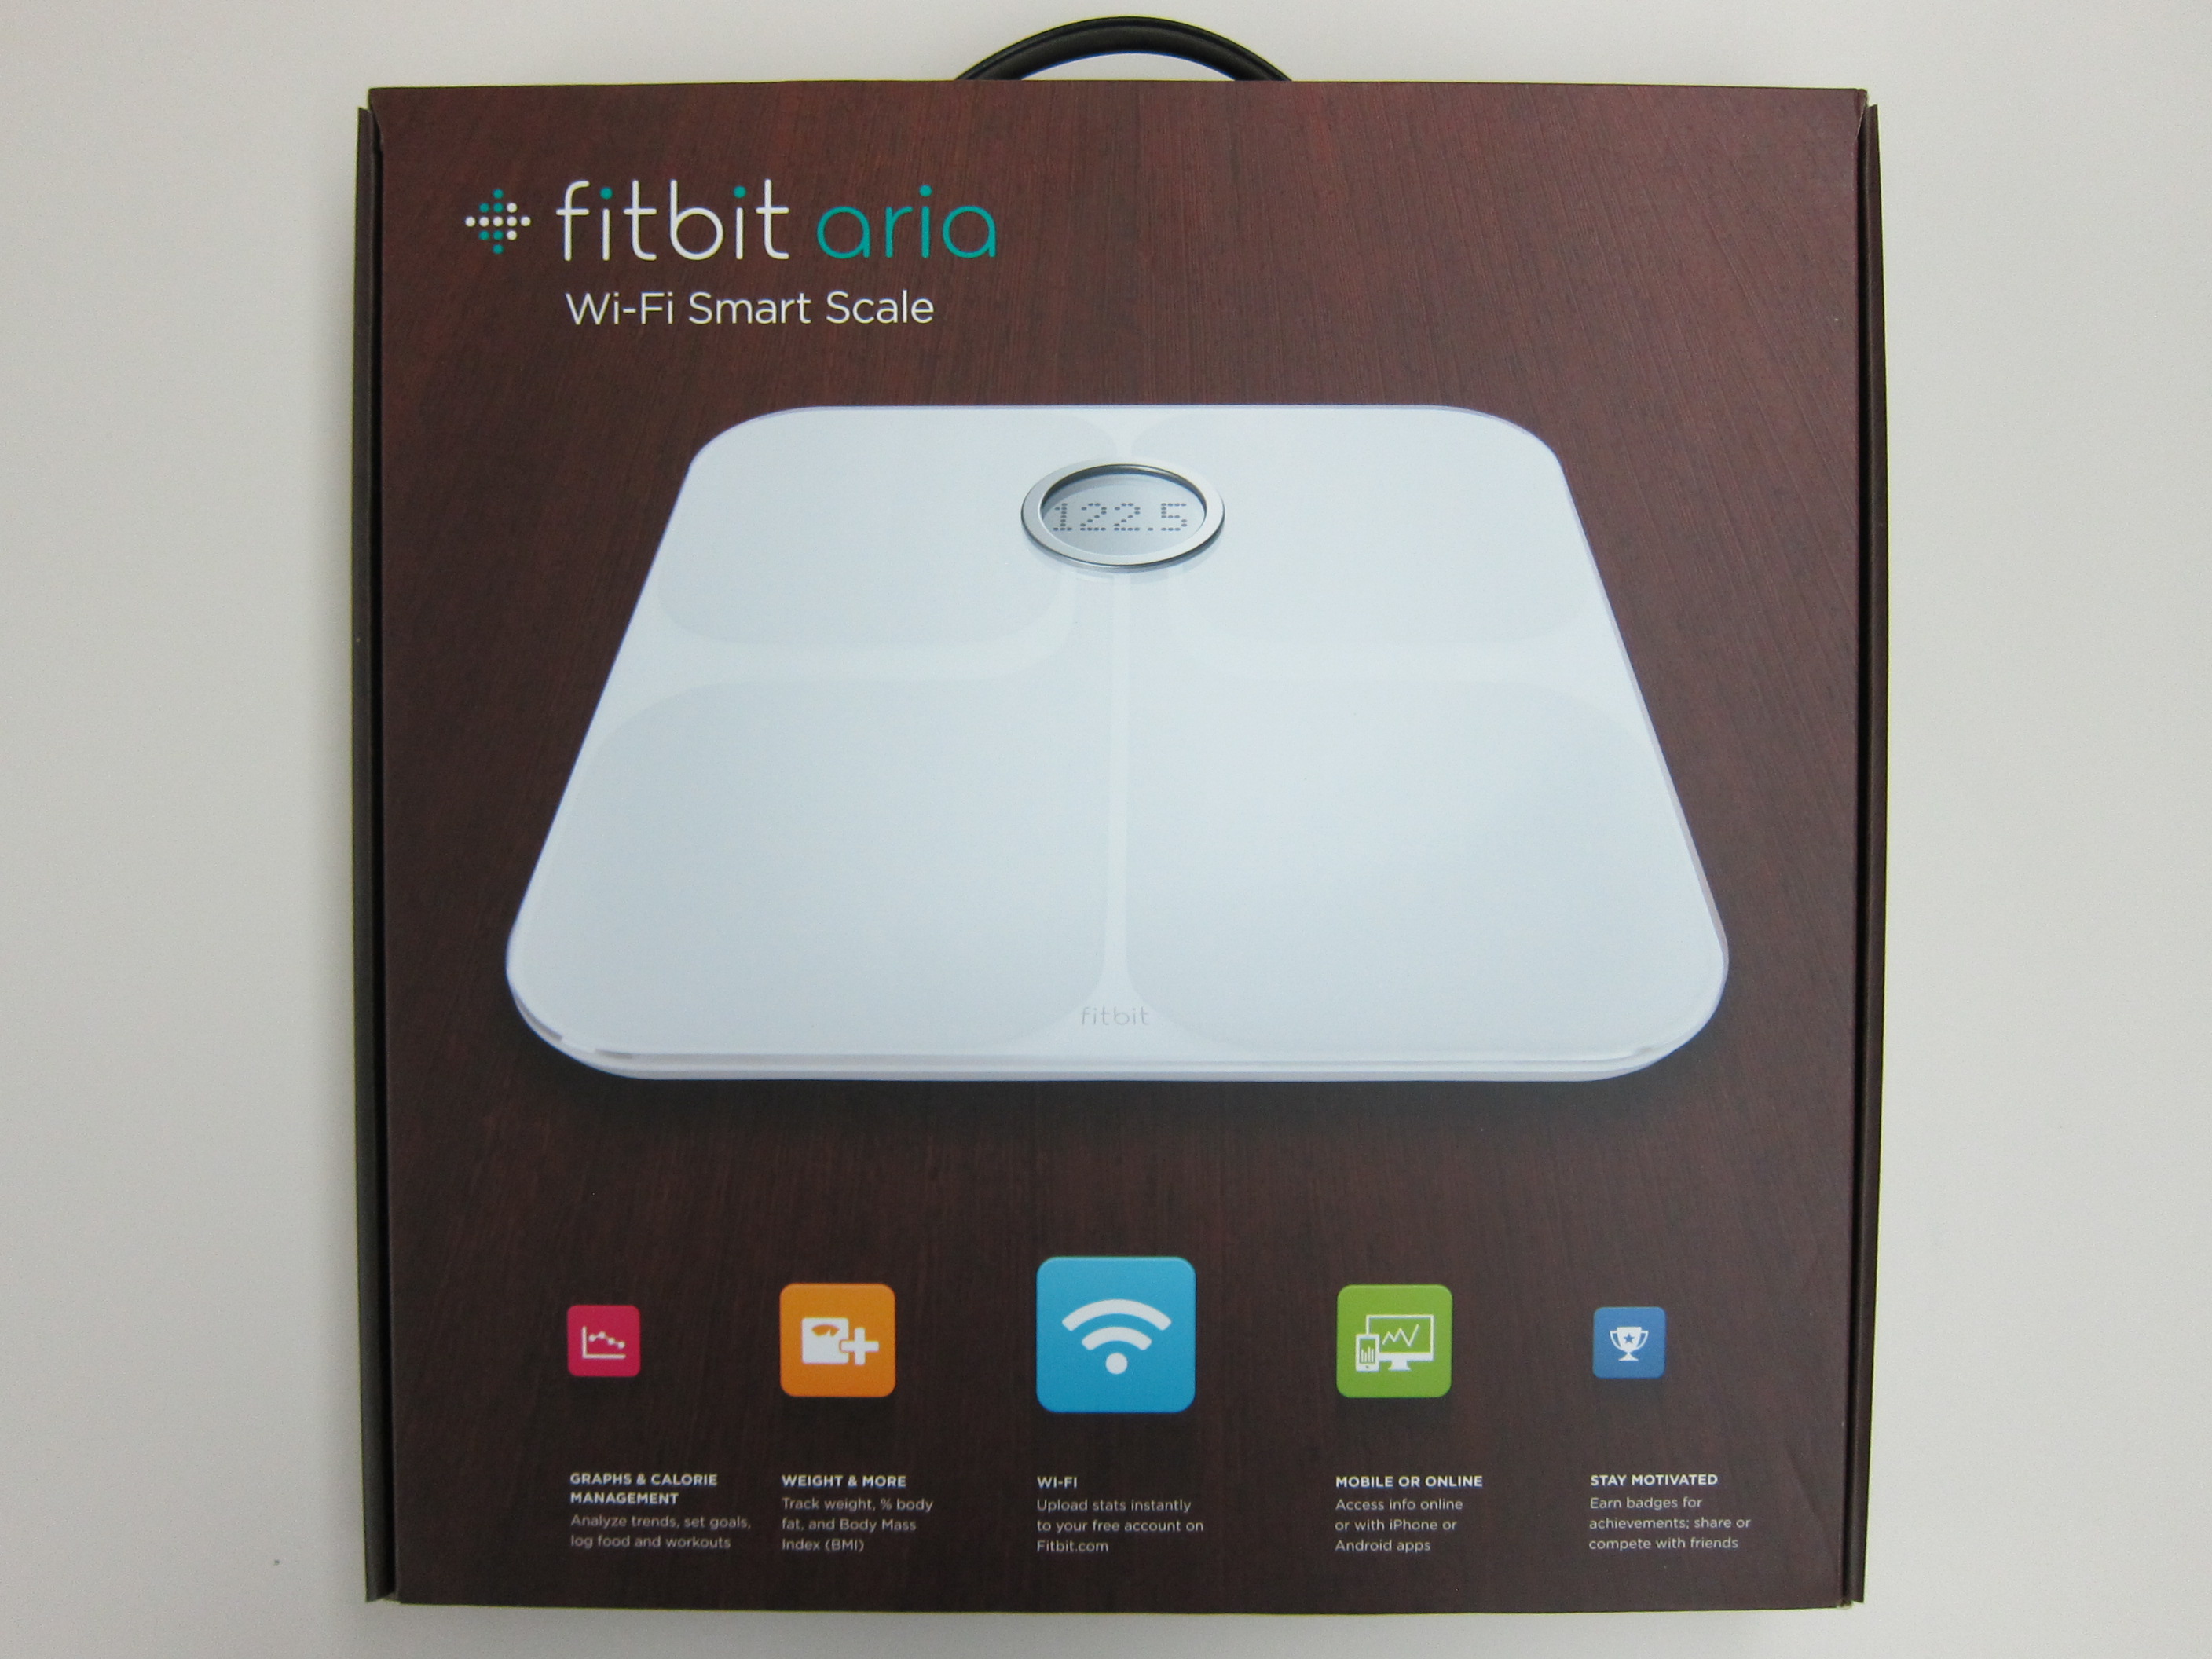 NEW! Fitbit Aria WiFi Smart Scale with Pro Body Composition